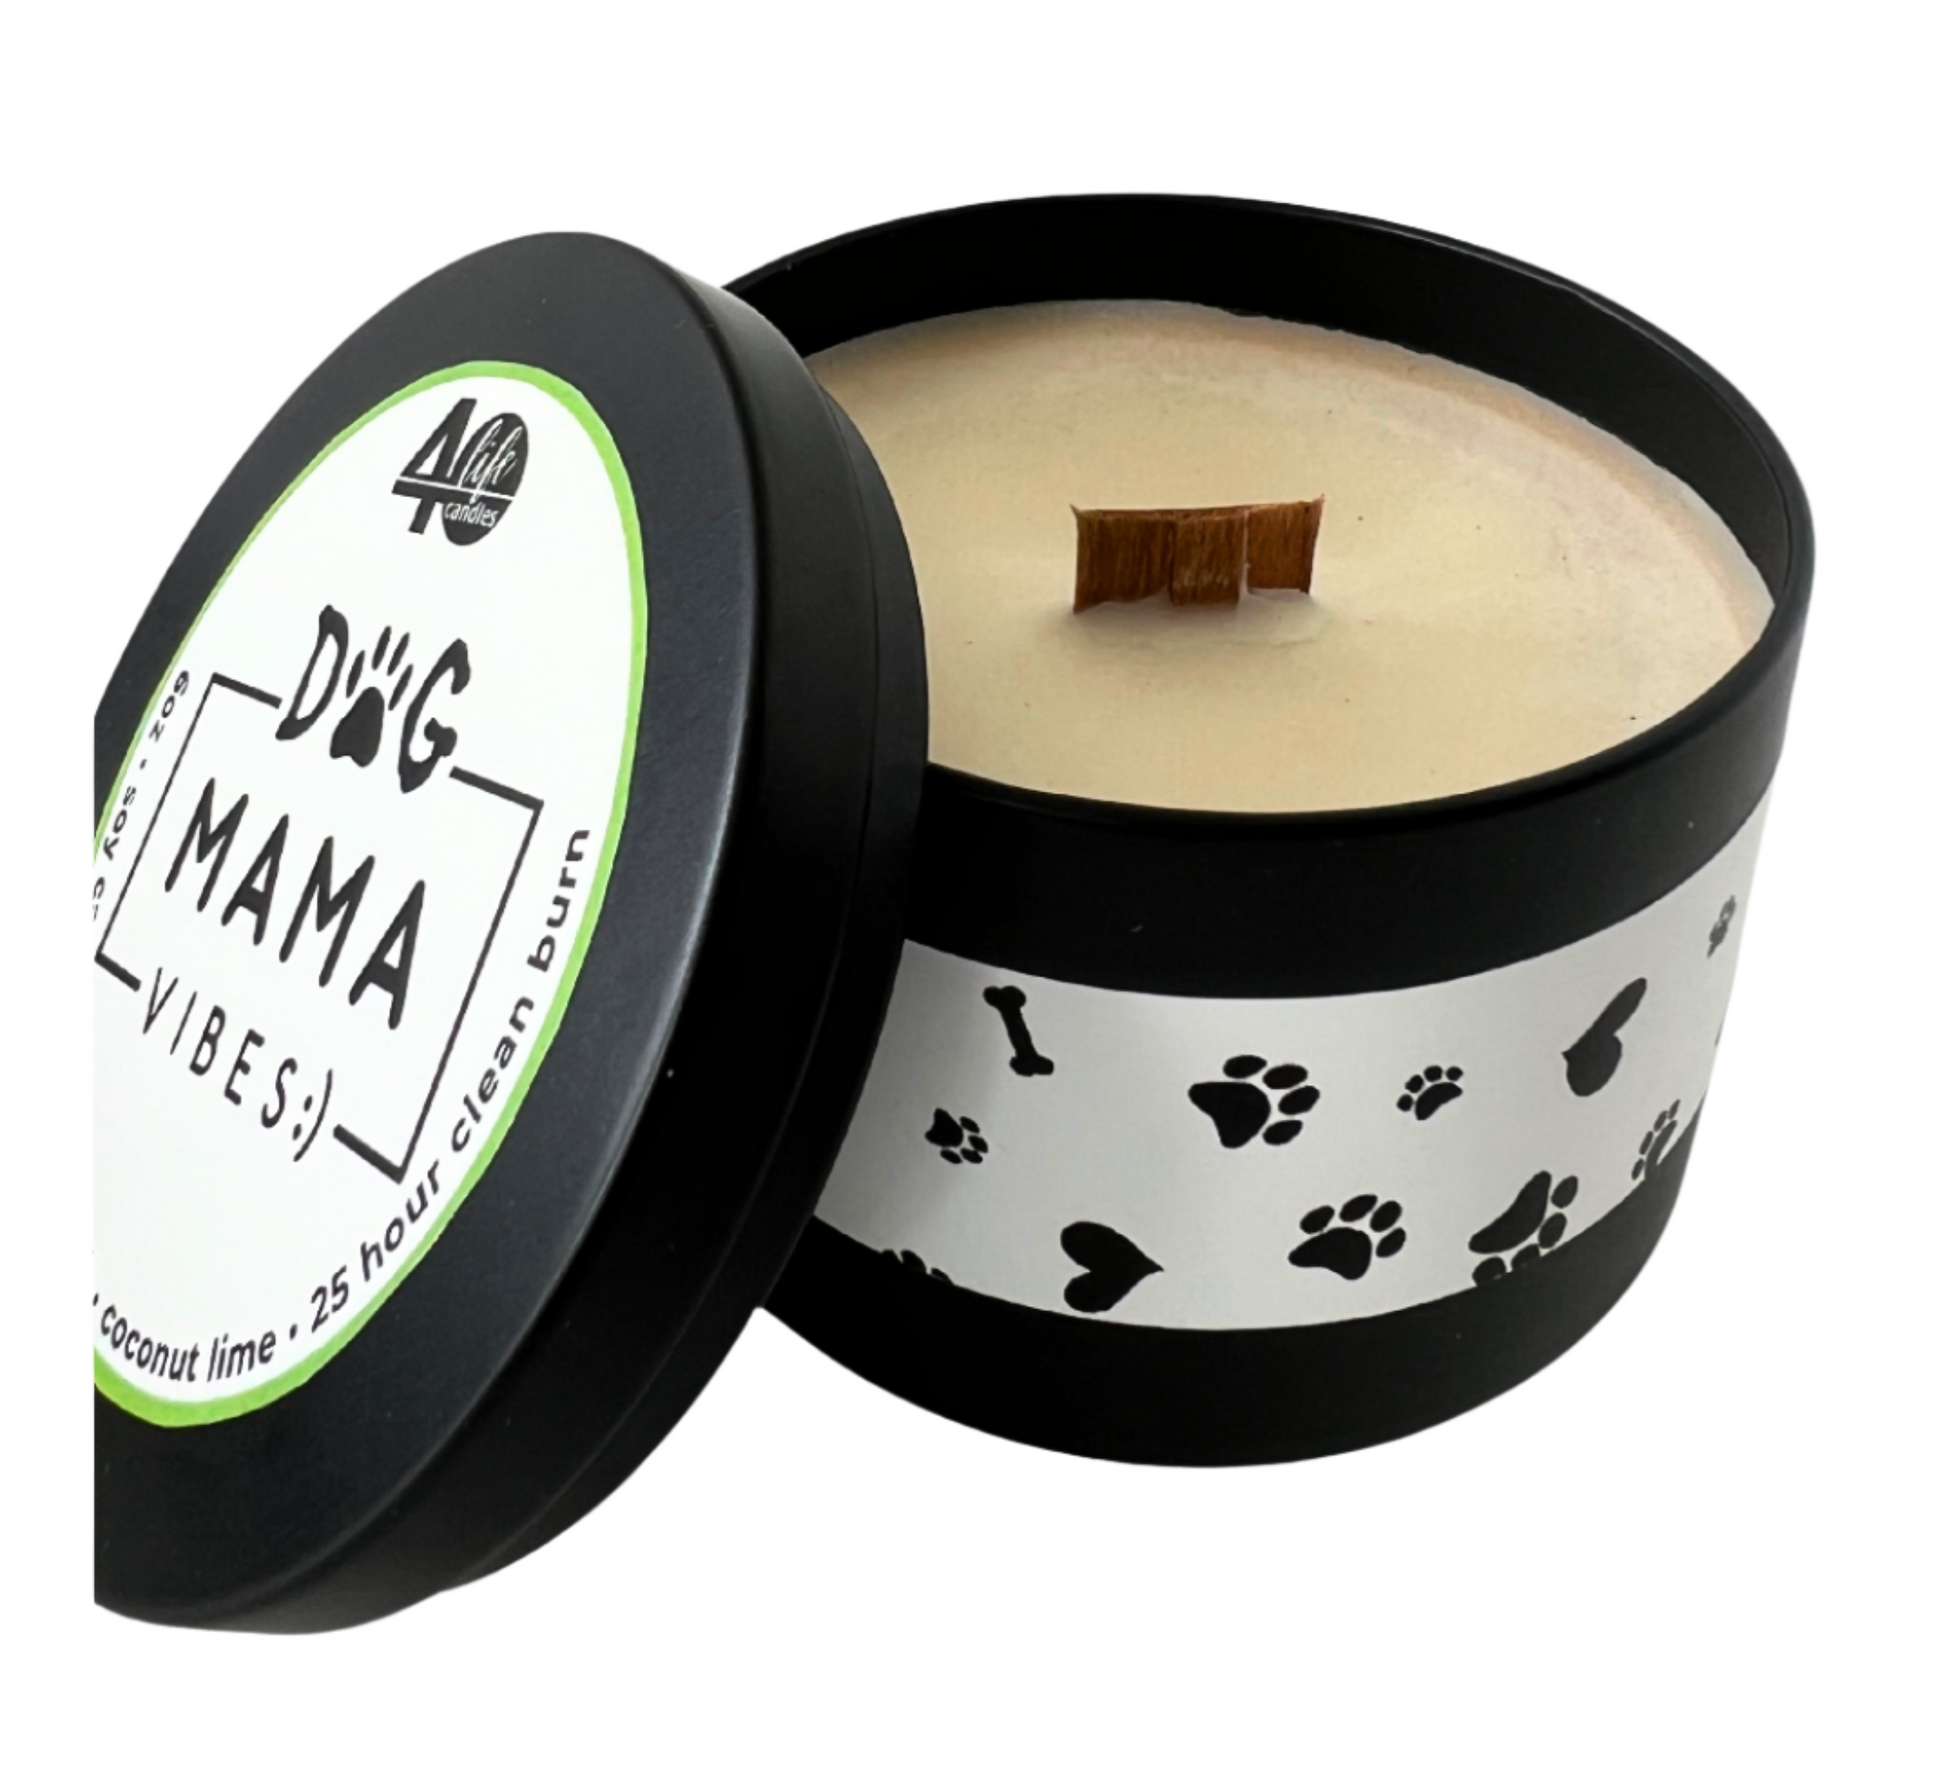 Dog Mama Vibes soy candle in coconut lime scent lasting 25 clean hours